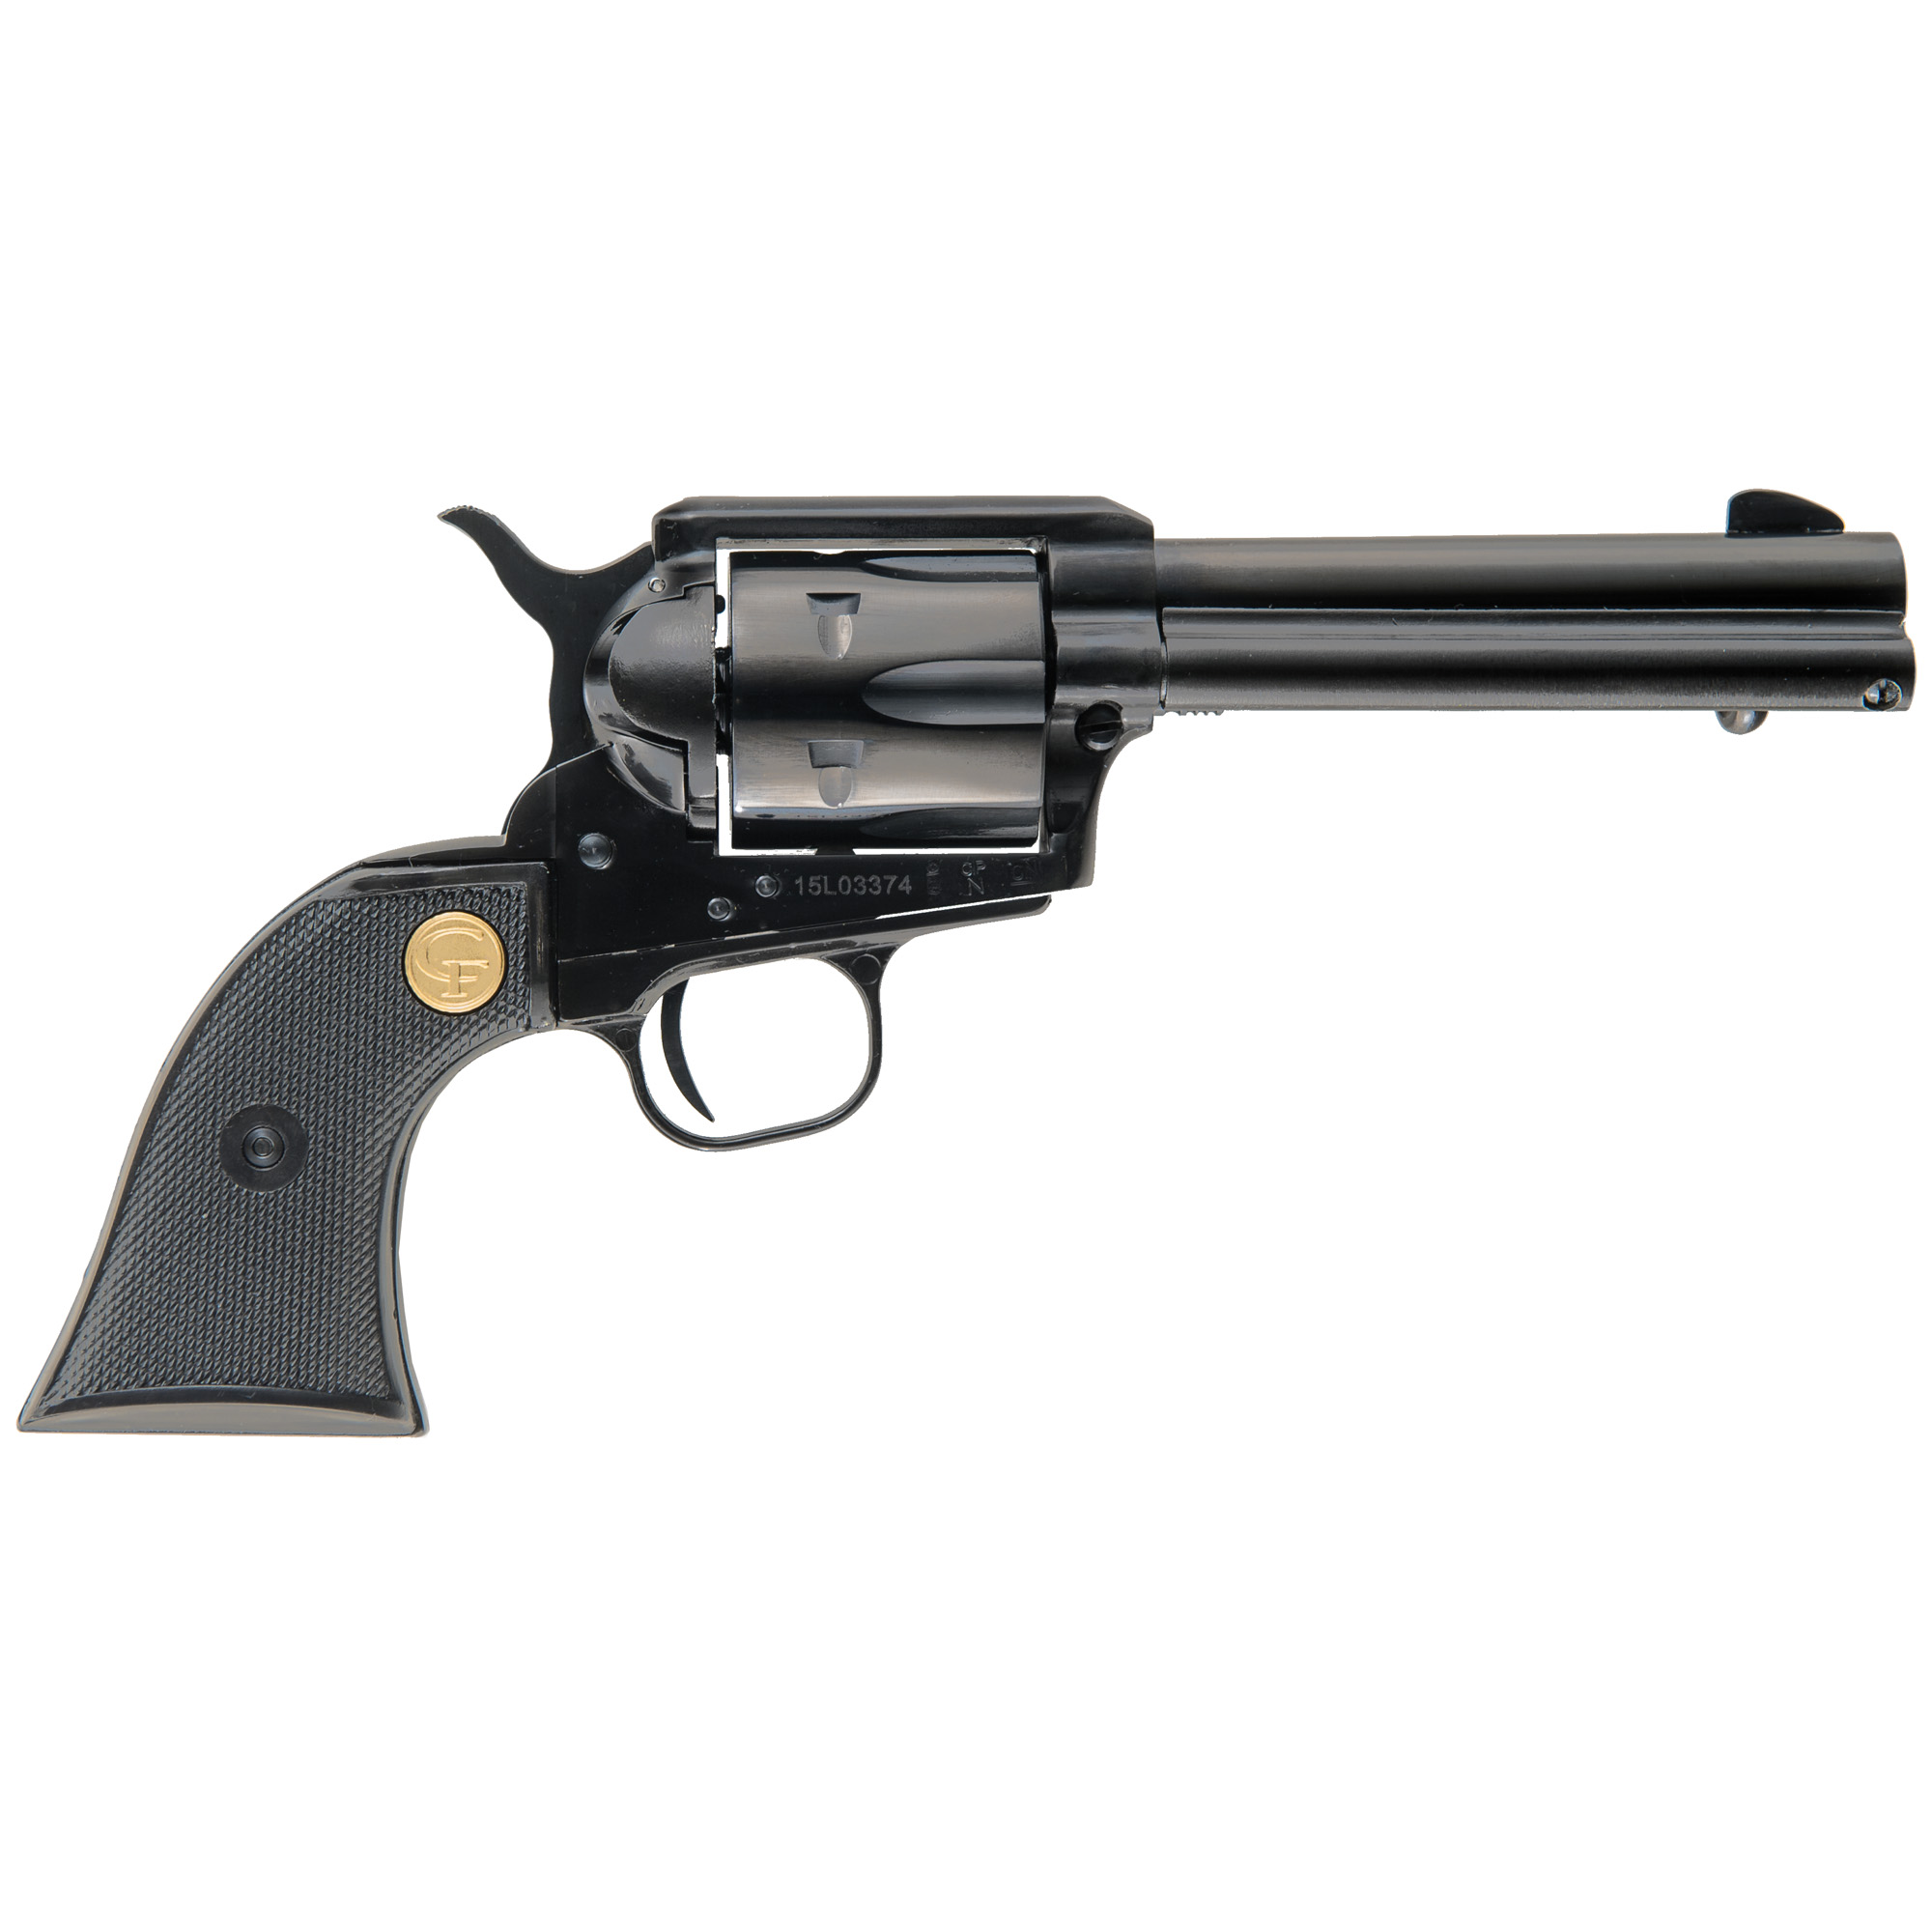 Chiappa Firearms, 1873-22 SAA, Revolver, Single Action, 22LR, 4.75" Barrel, Alloy, Blued Finish, 6 Rounds